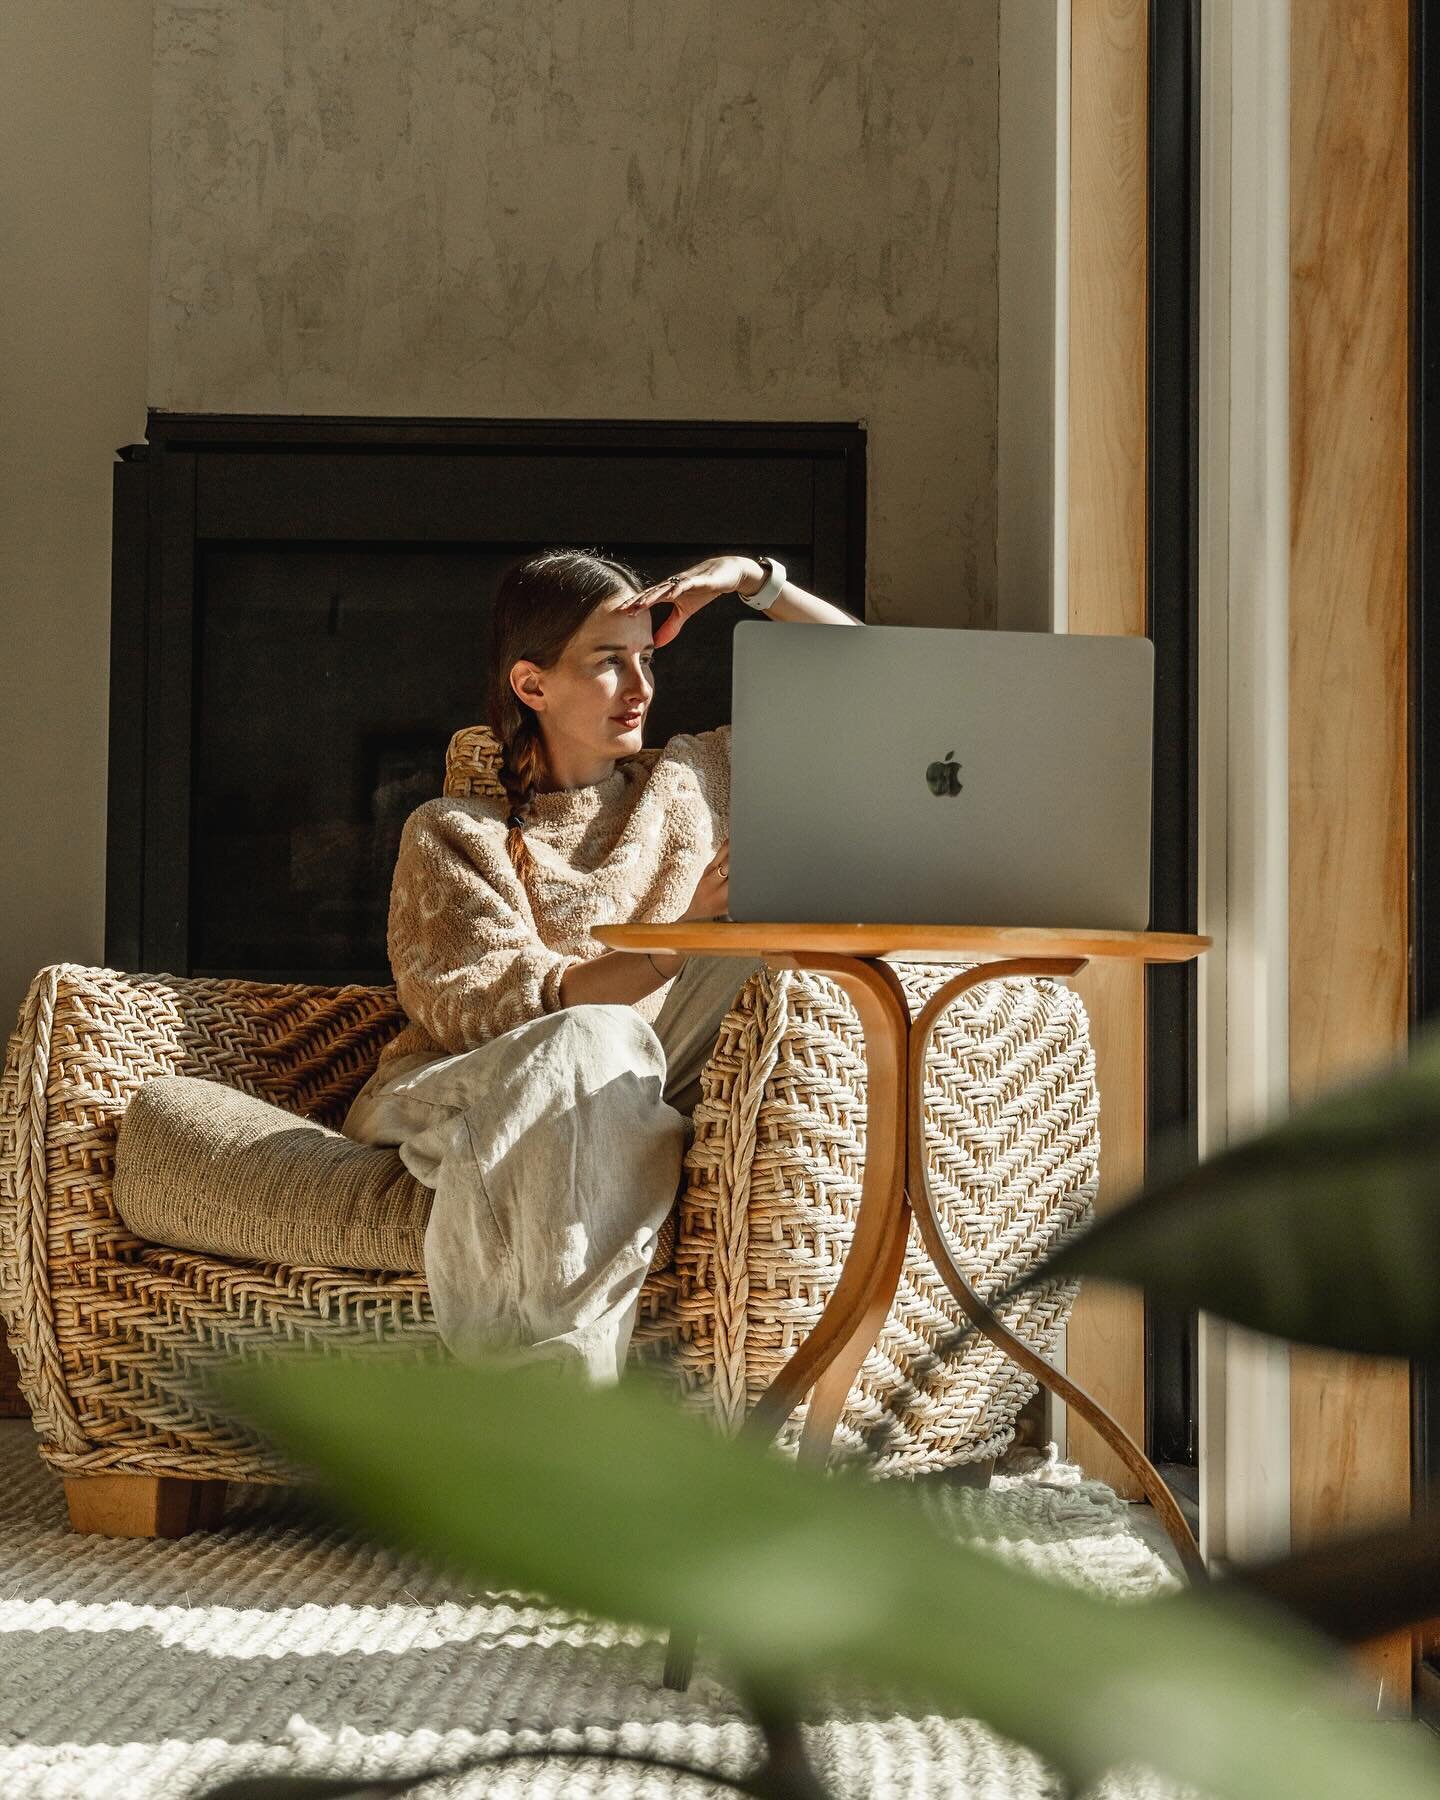 When you&rsquo;re working but really just not so patiently waiting for the warm weather to come back 🌞 

Photos taken at the very dreamy Kodiak Cabin by @northcountrycabinco #sonyalpha